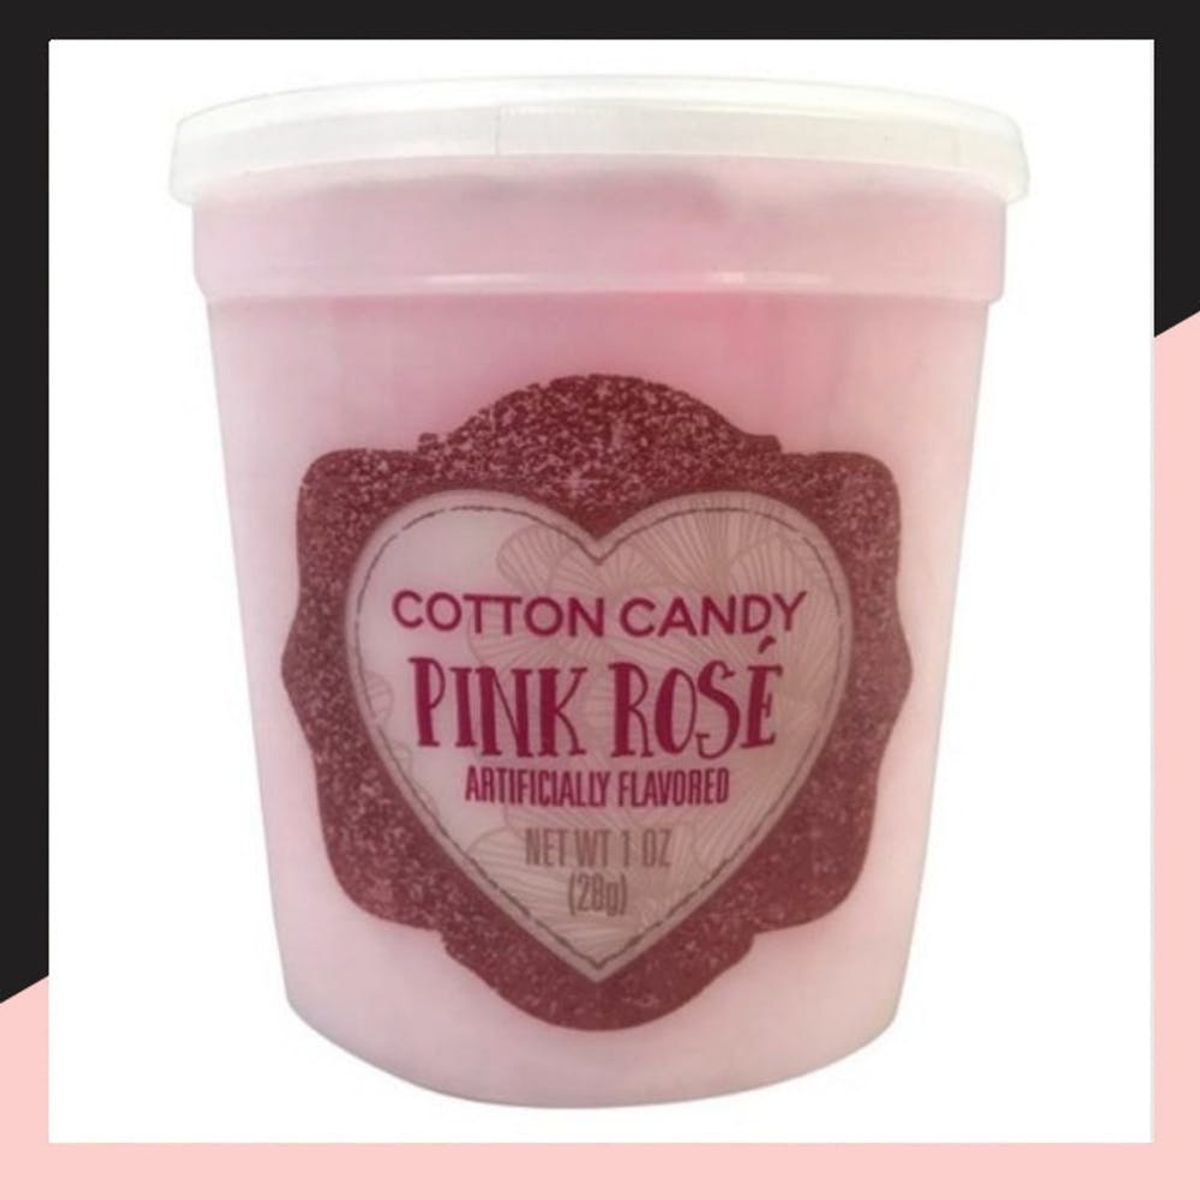 Just In Time for Valentine’s Day, Target Debuts Rosé-Flavored Cotton Candy